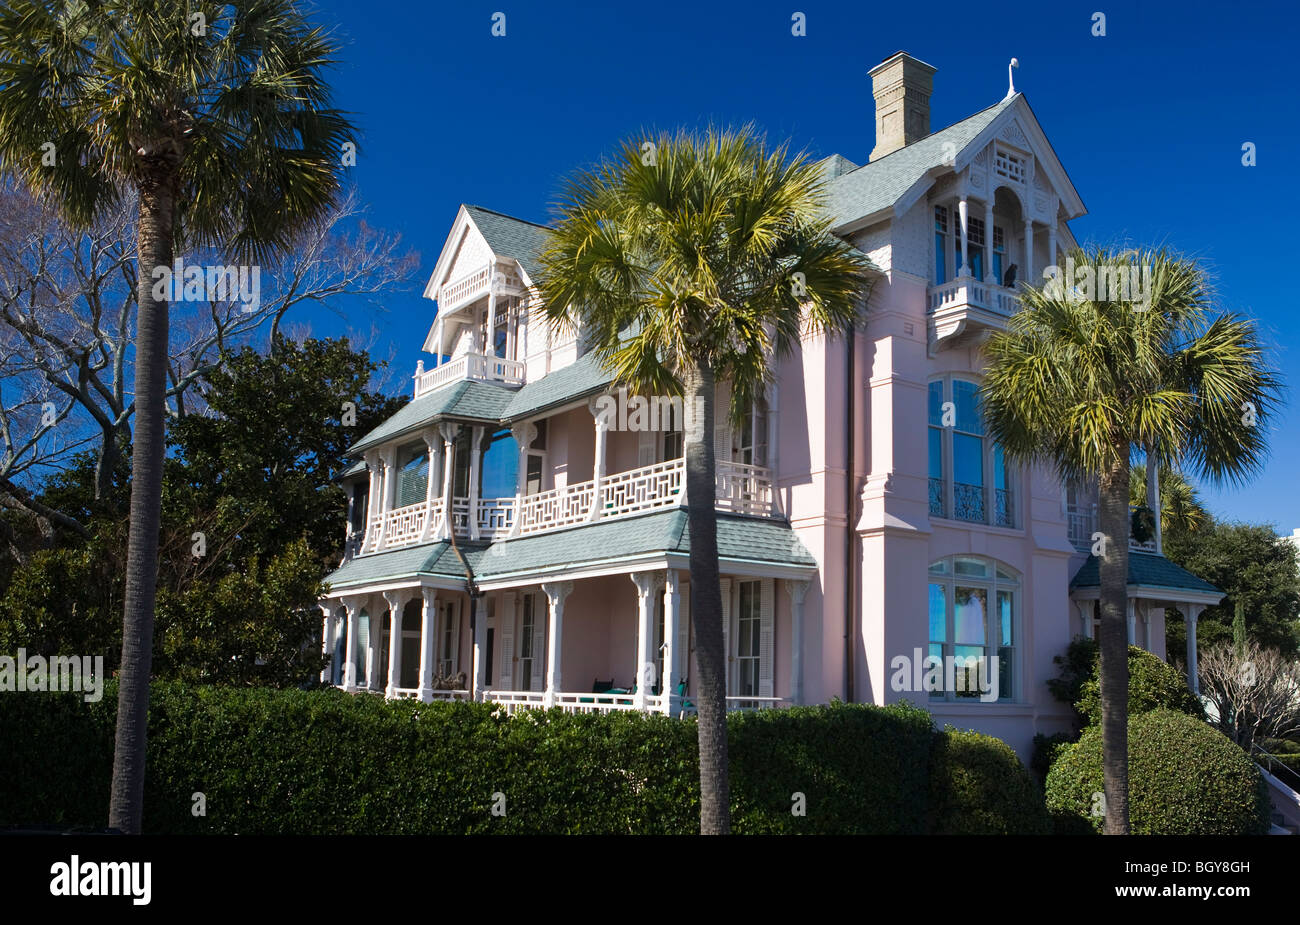 Large pink house with porches and Palmetto trees, Charleston, South Carolina, United States of America. Stock Photo